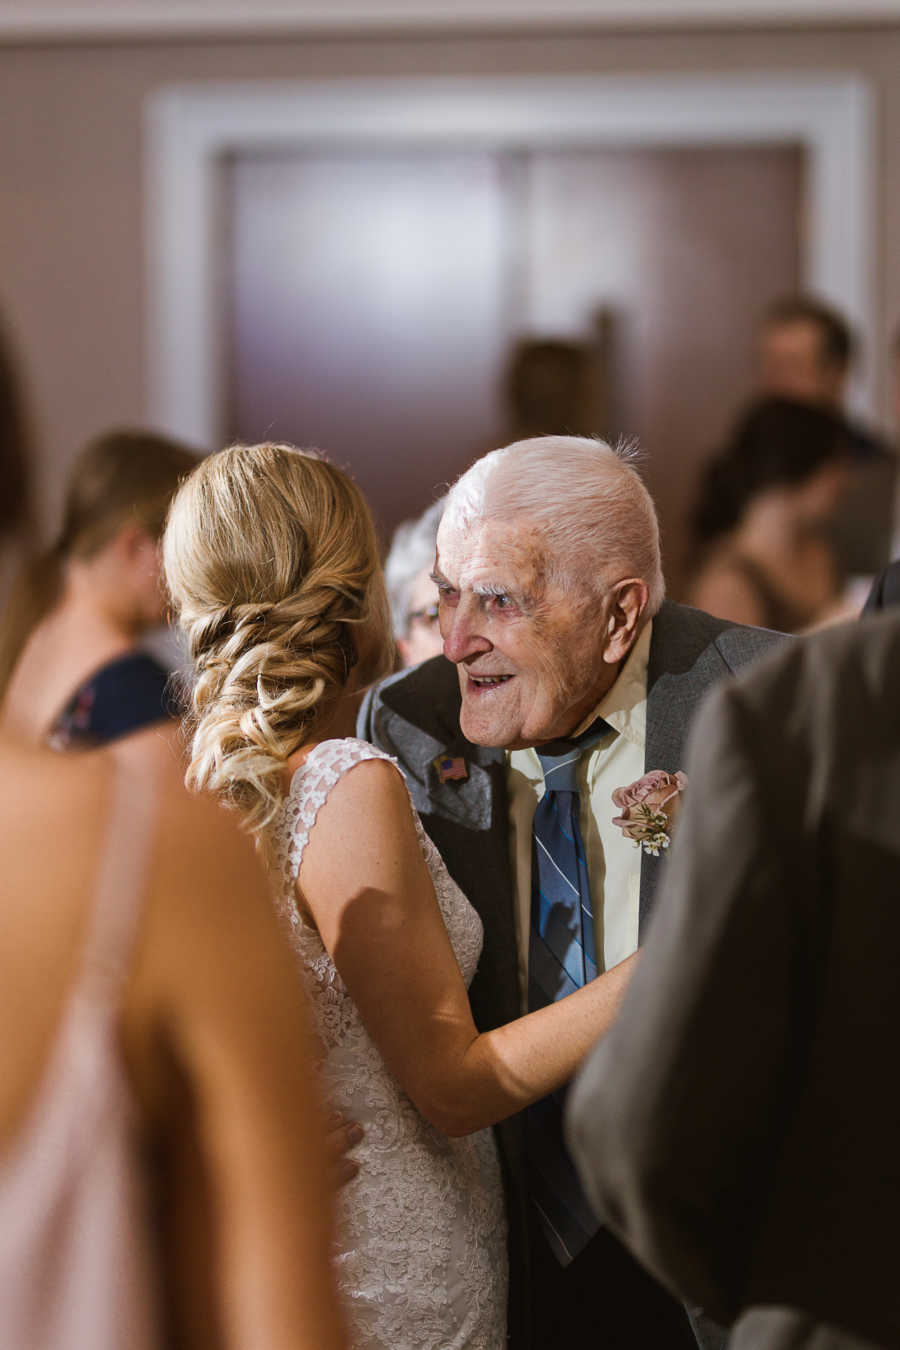 Grandfather smiles granddaughter close as they dance at her wedding